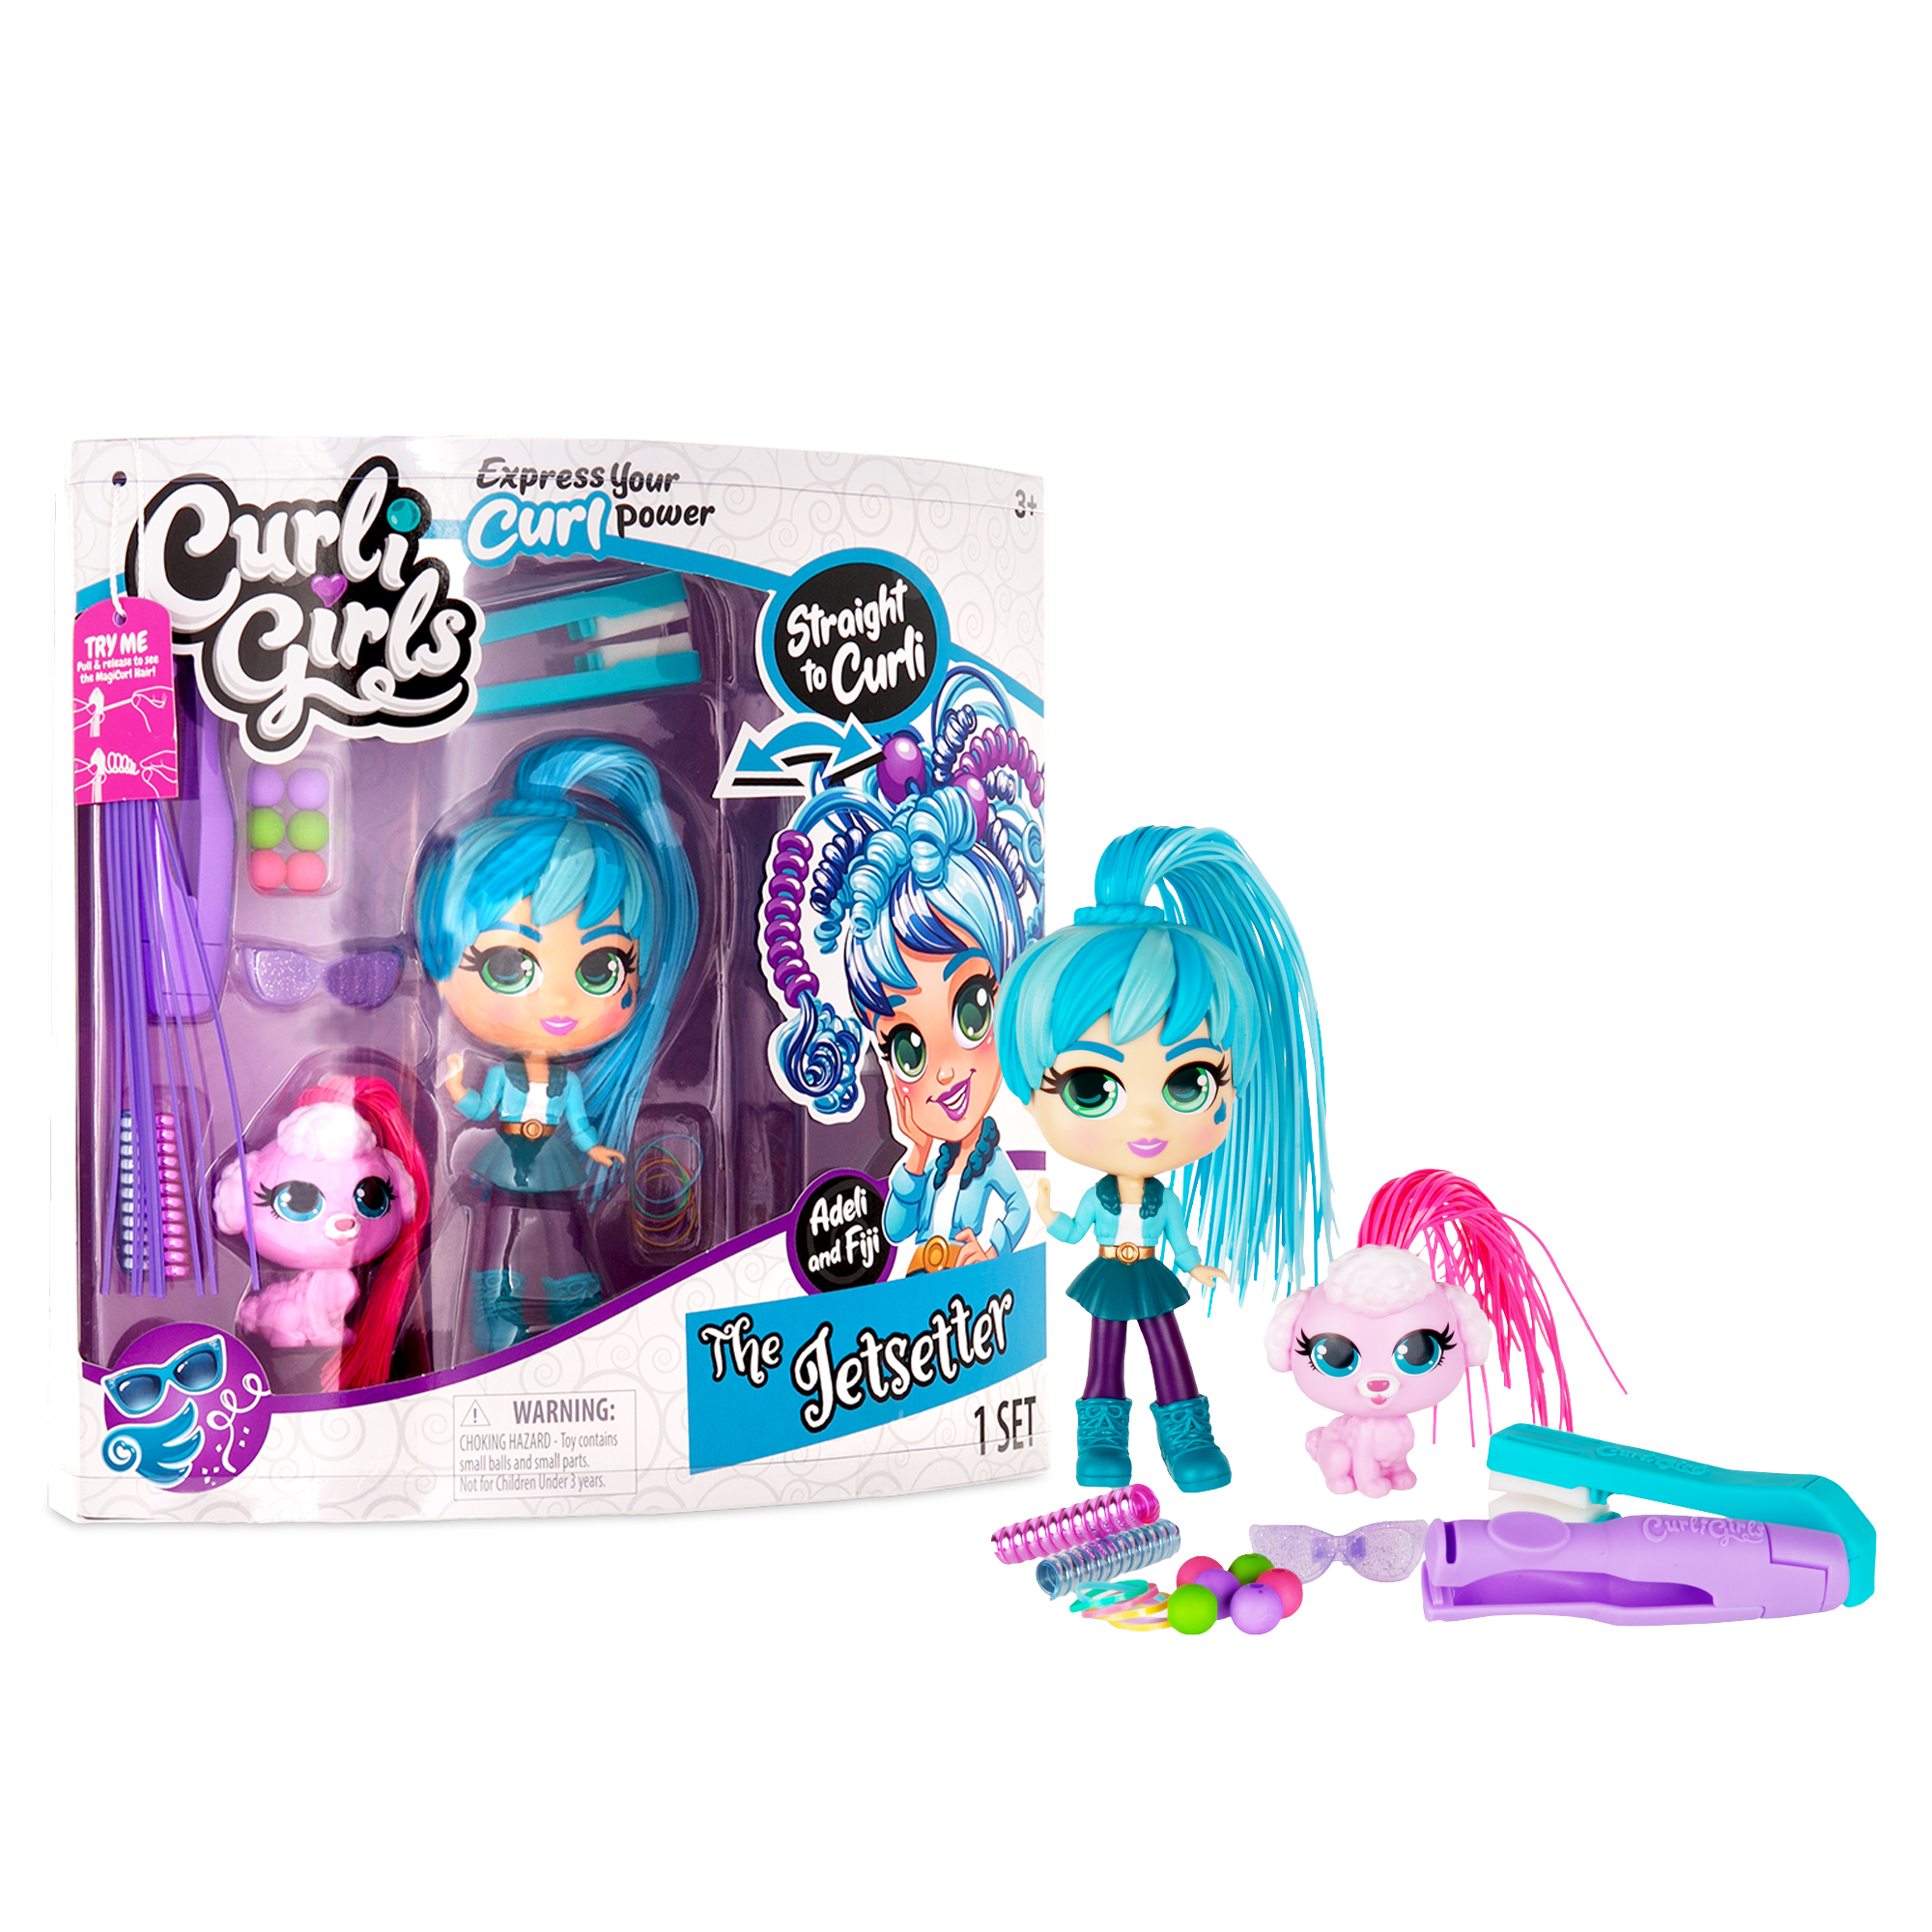 Basic Fun Curligirls Charli The Pop Star Hairstyling Doll With Magicurl Hair T2 for sale online